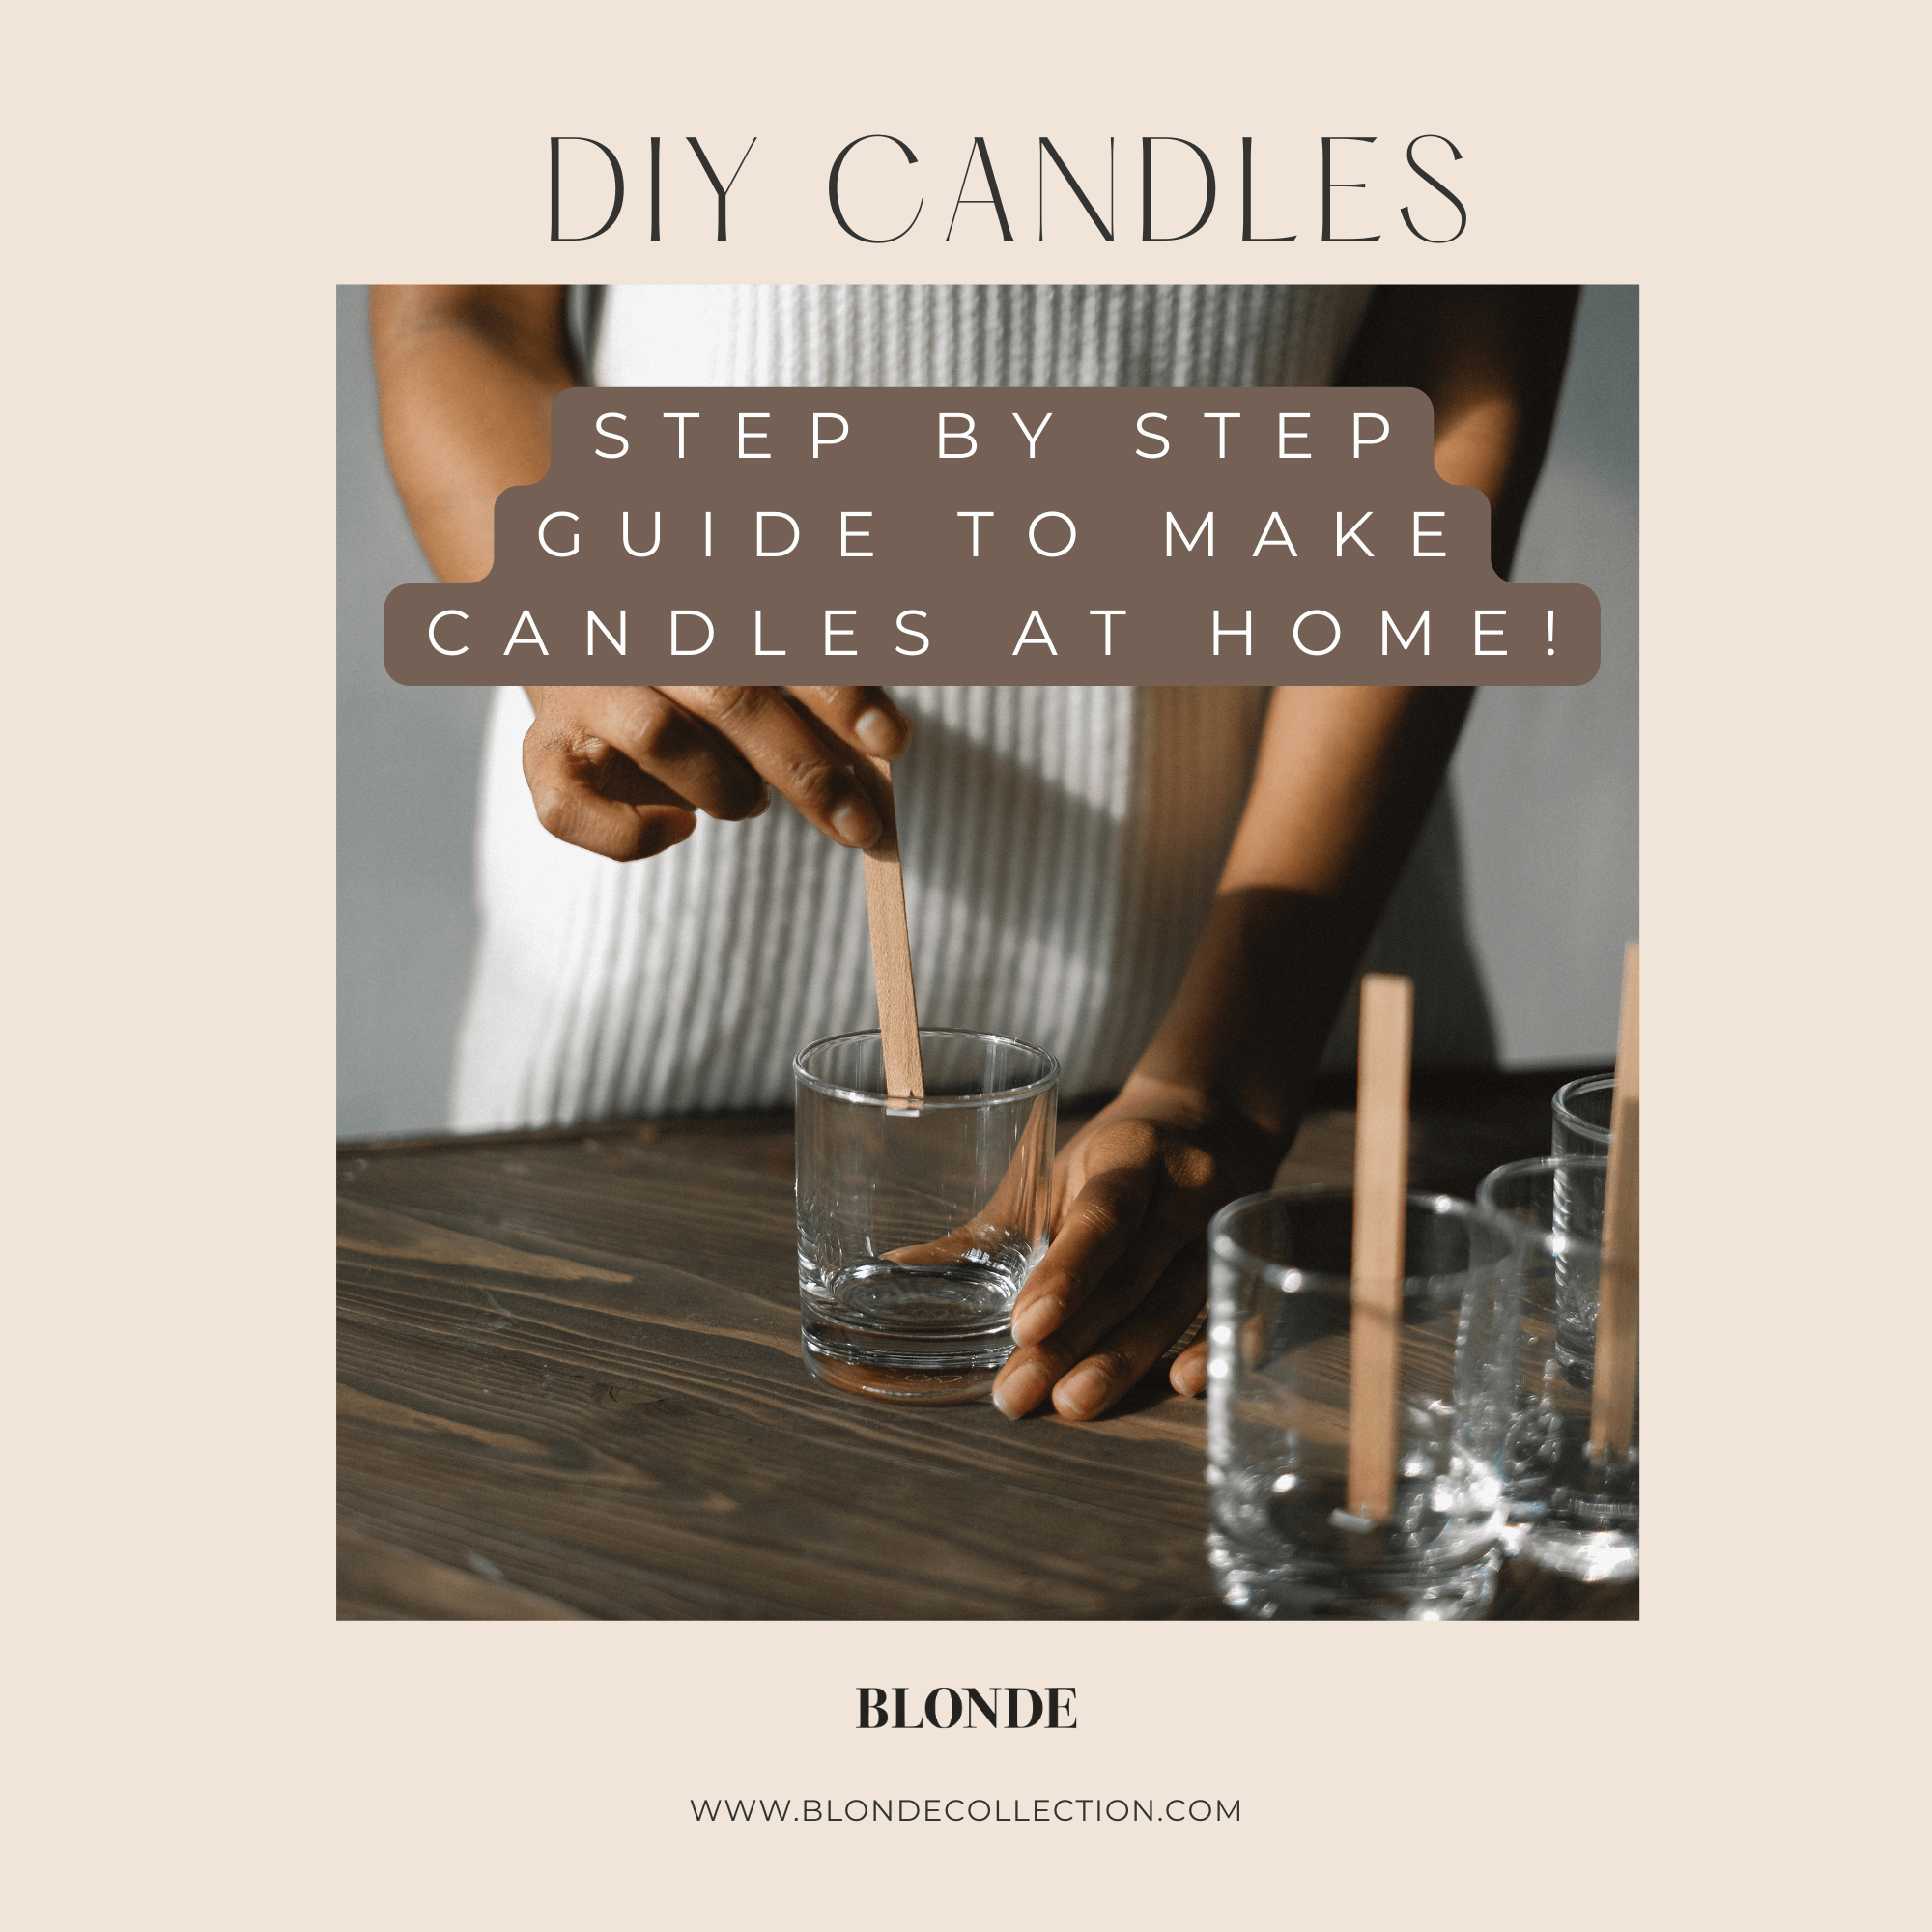 DIY CANDLE- STEP BY STEP GUIDE TO MAKE CANDLES AT HOME!